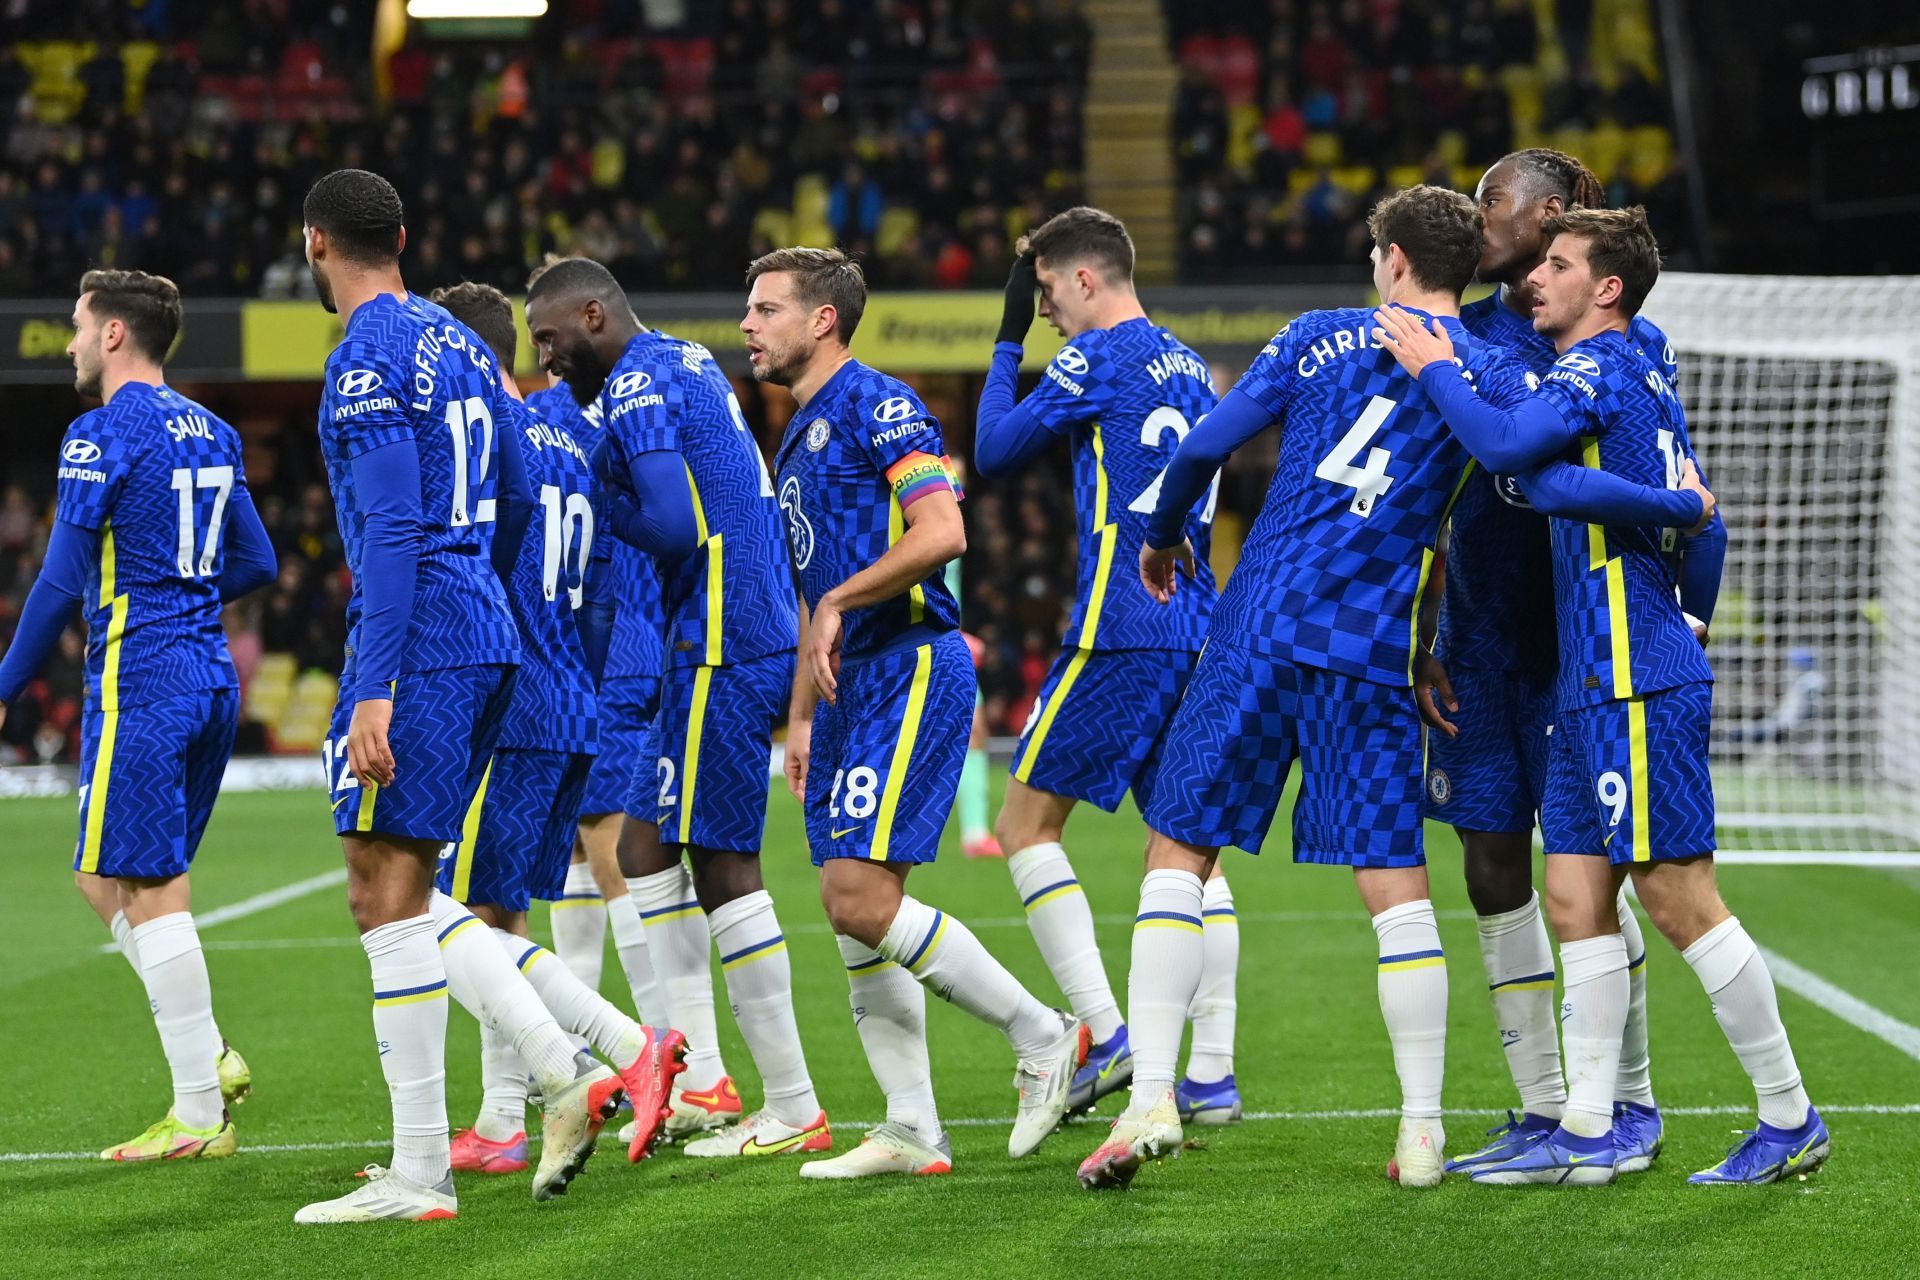 Chelsea registered a hard-fought 2-1 win over Watford in their Premier League clash on Wednesday